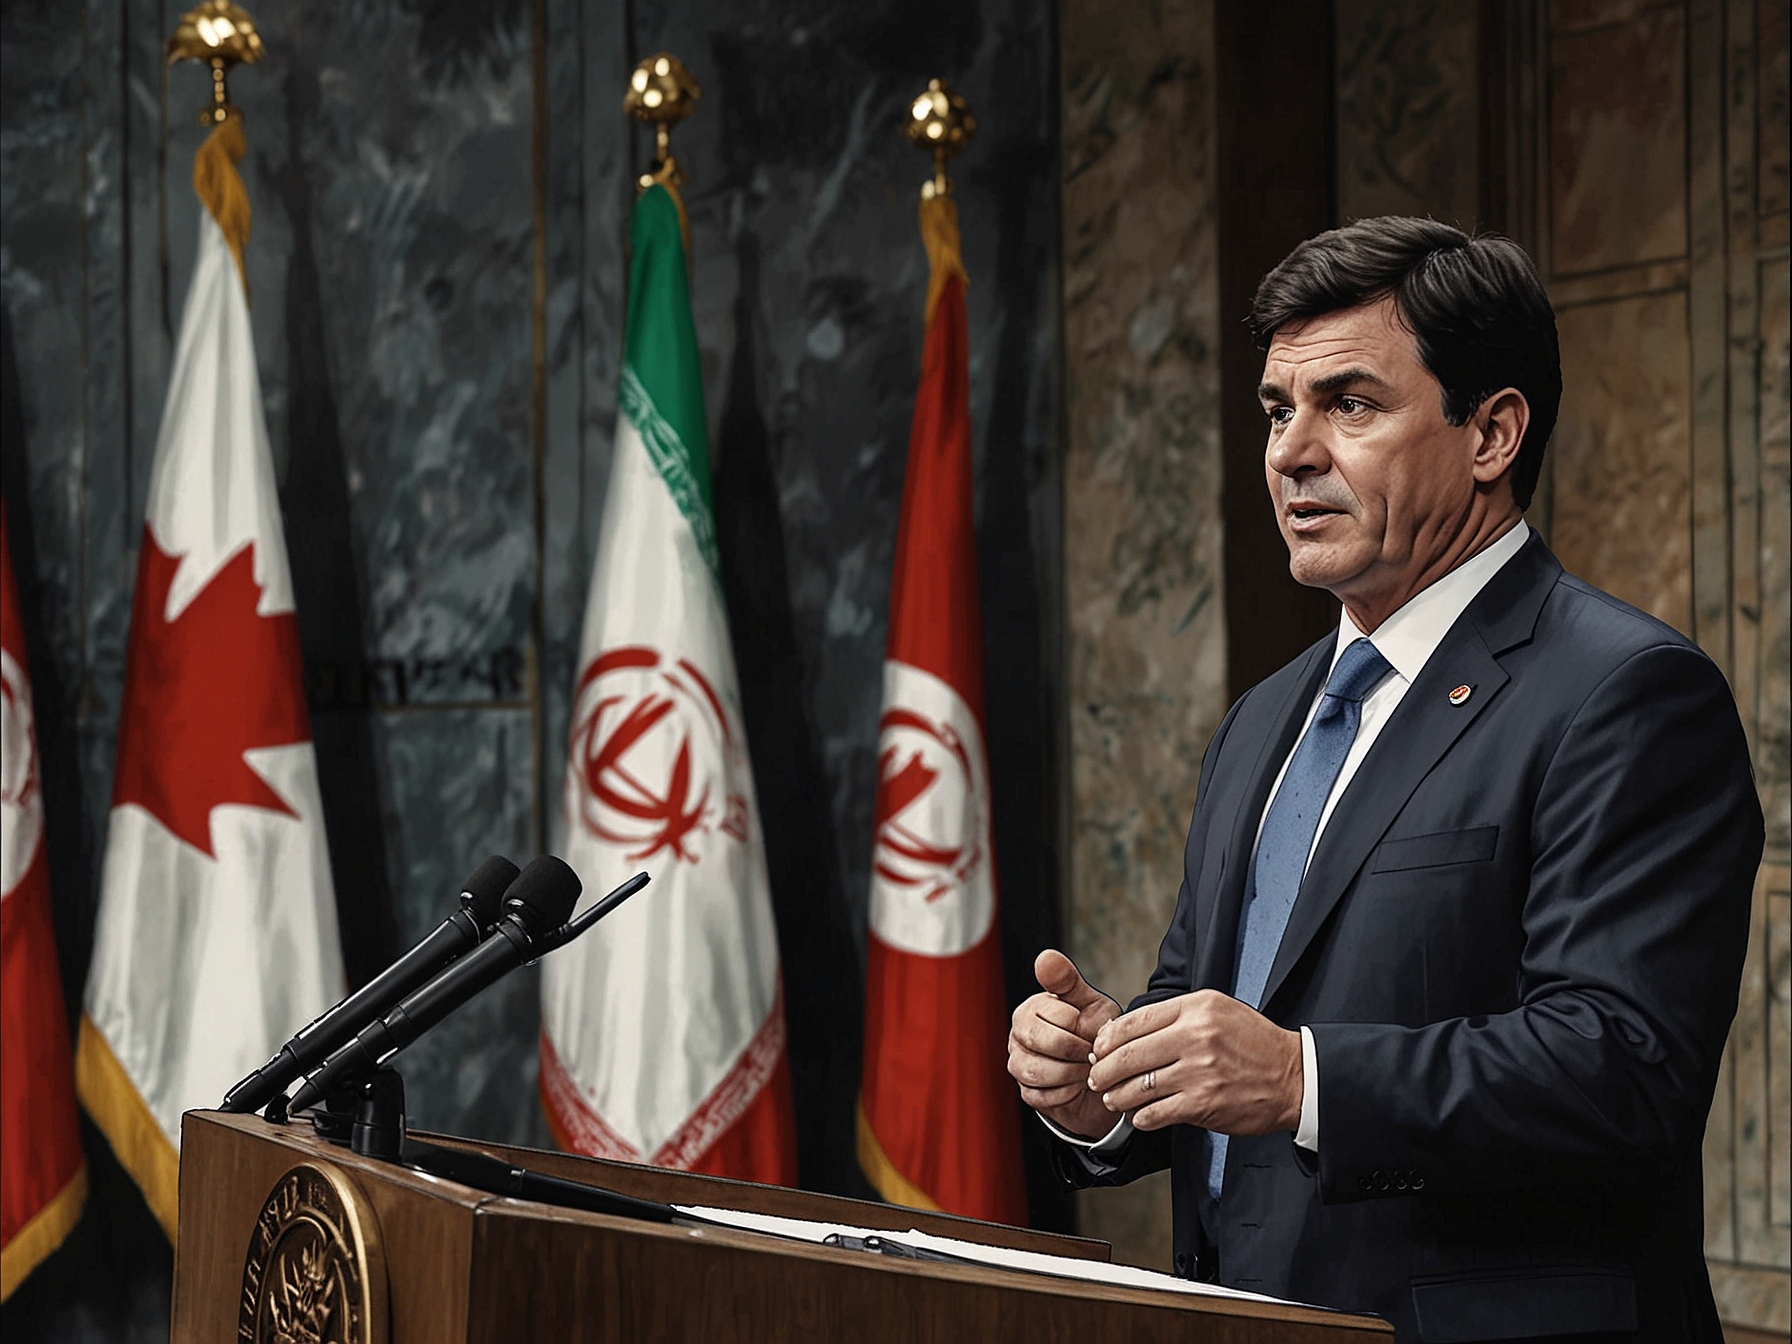 Canadian Public Safety Minister Dominic LeBlanc announces the designation of Iran's IRGC as a terrorist entity during a press conference, highlighting Canada’s commitment to fighting terrorism.